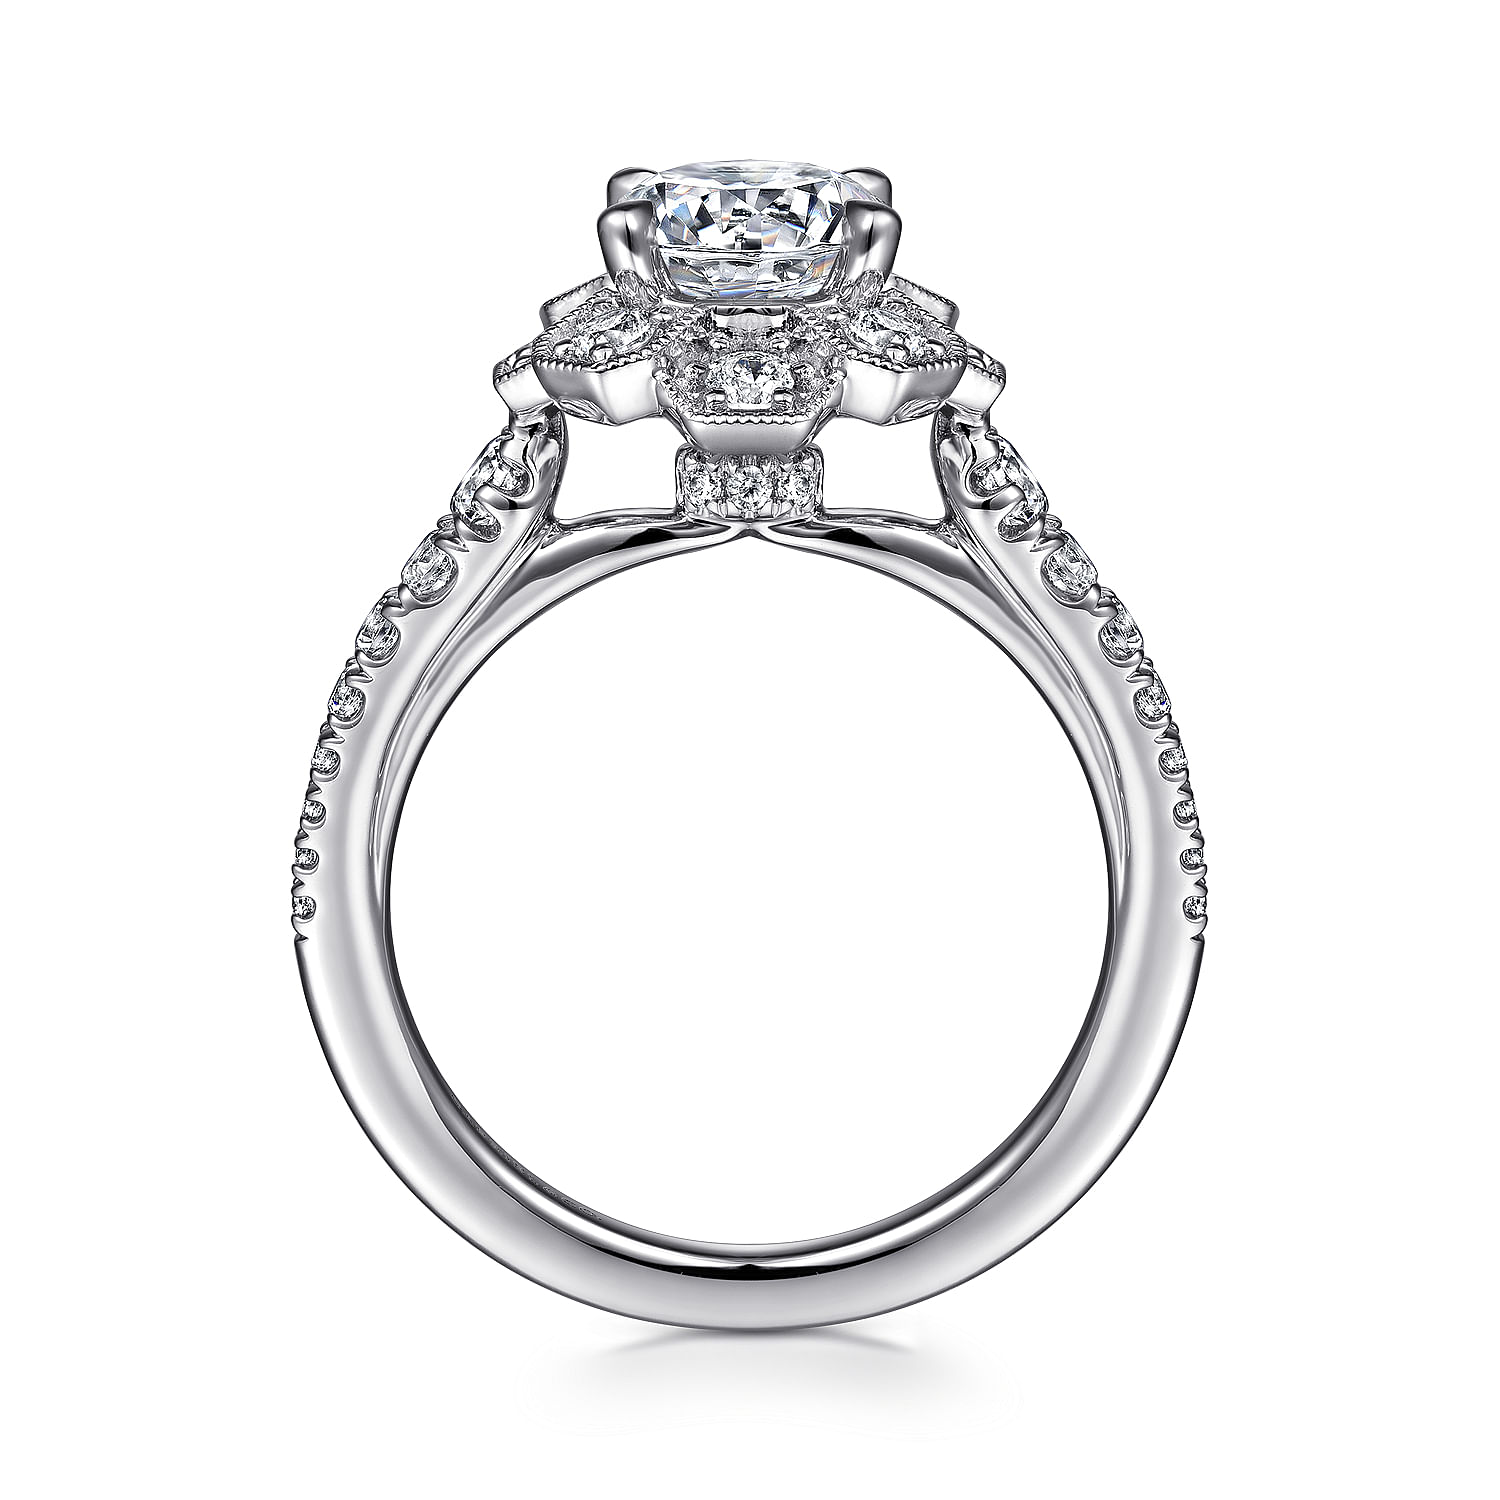 Art Deco Inspired 14K White Gold Floral Halo Round Diamond Engagement Ring